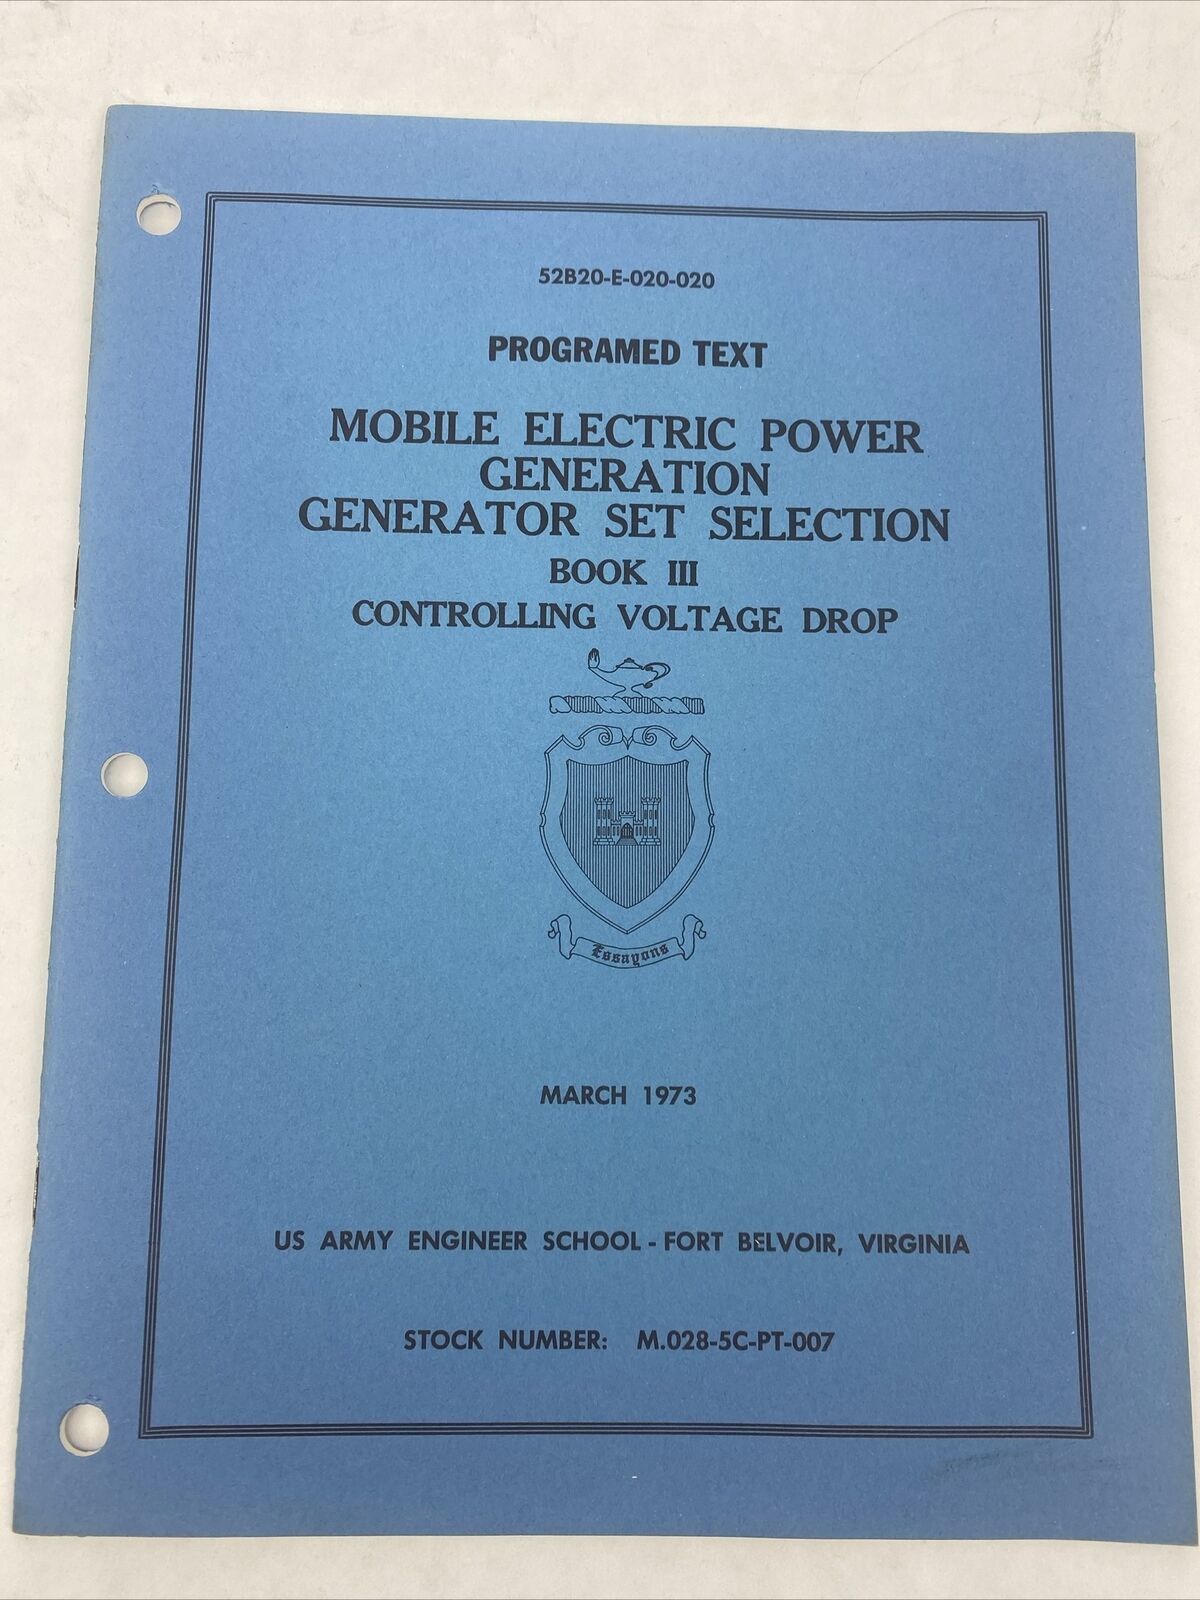 March 1973 US Army Engineer School Programed Text Mobile Electric Power Generato